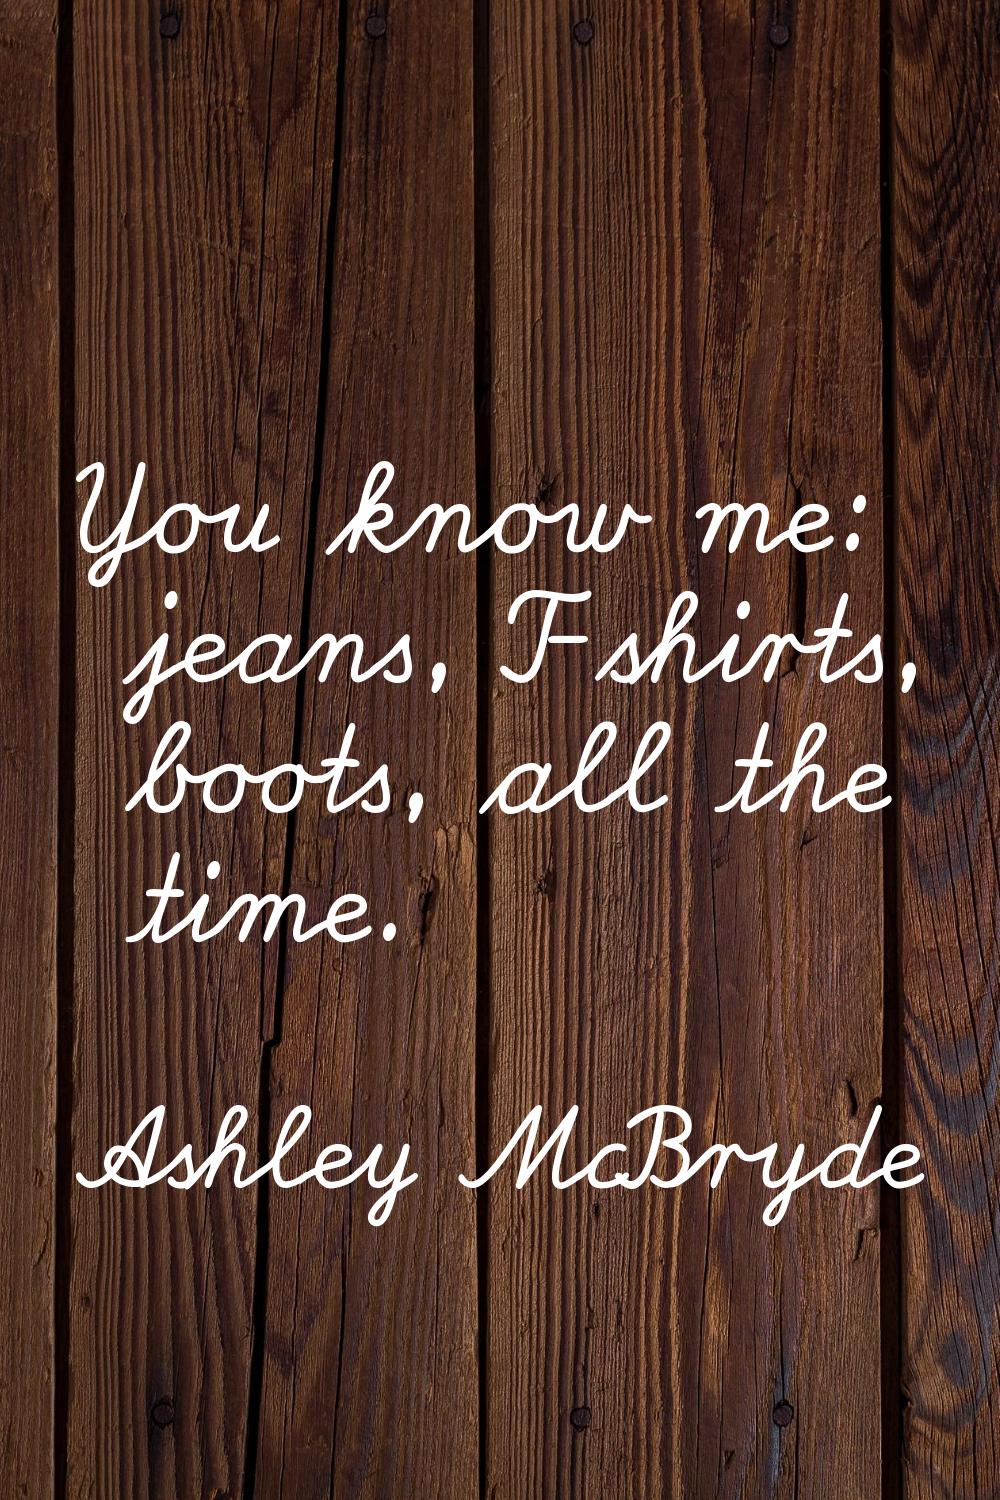 You know me: jeans, T-shirts, boots, all the time.